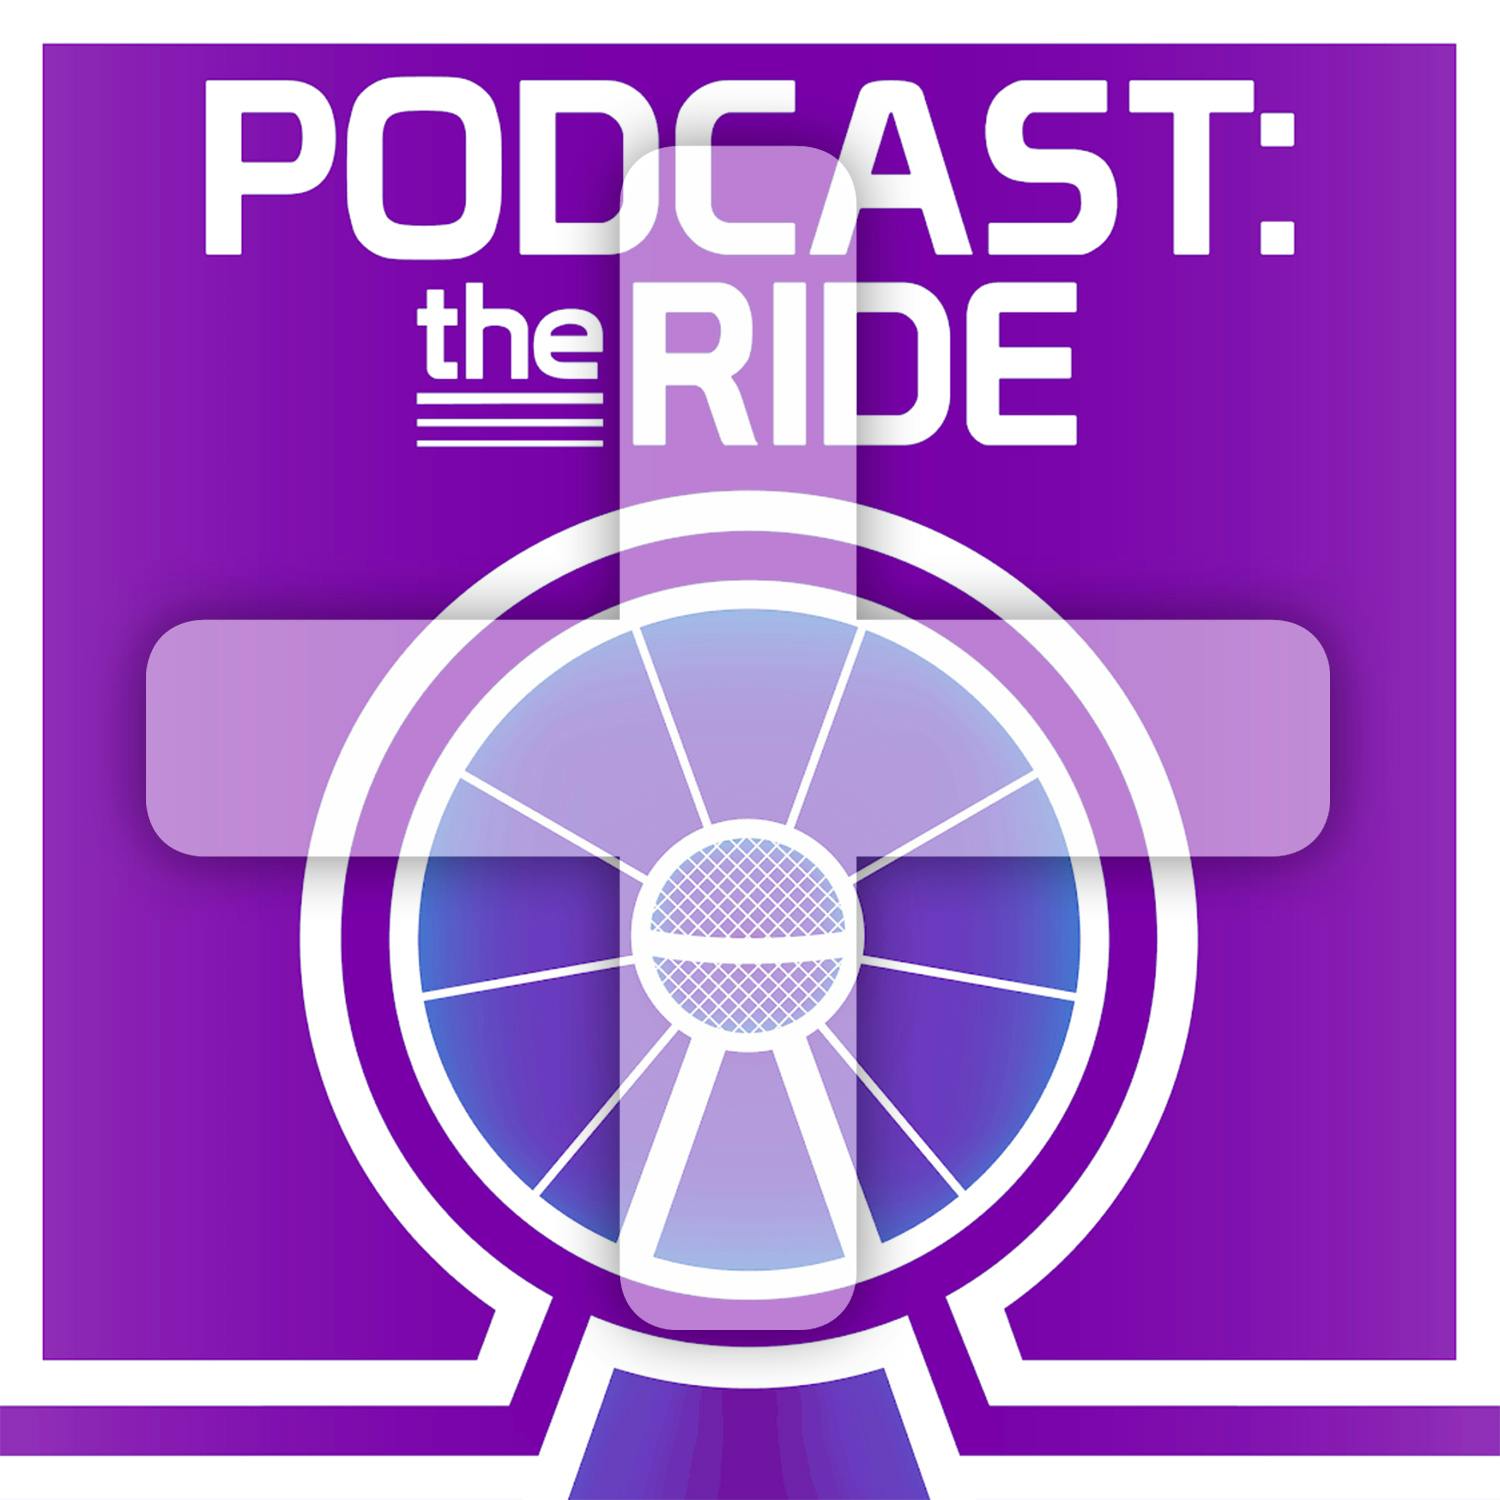 Podcast: The Ride PLUS podcast tile